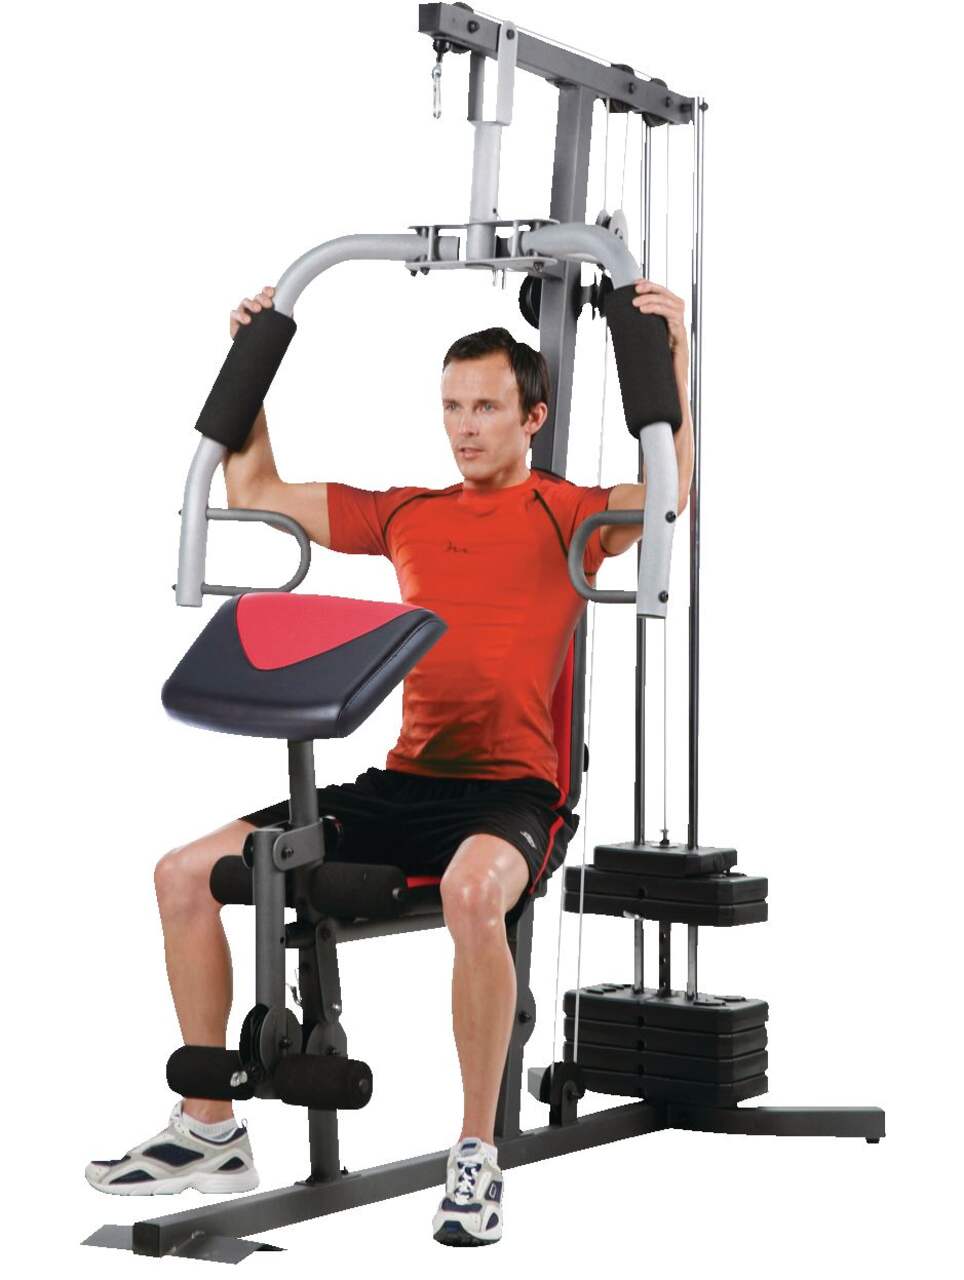 Weider 2980 X Home Gym System with 80 Lb. Vinyl Weight Stack